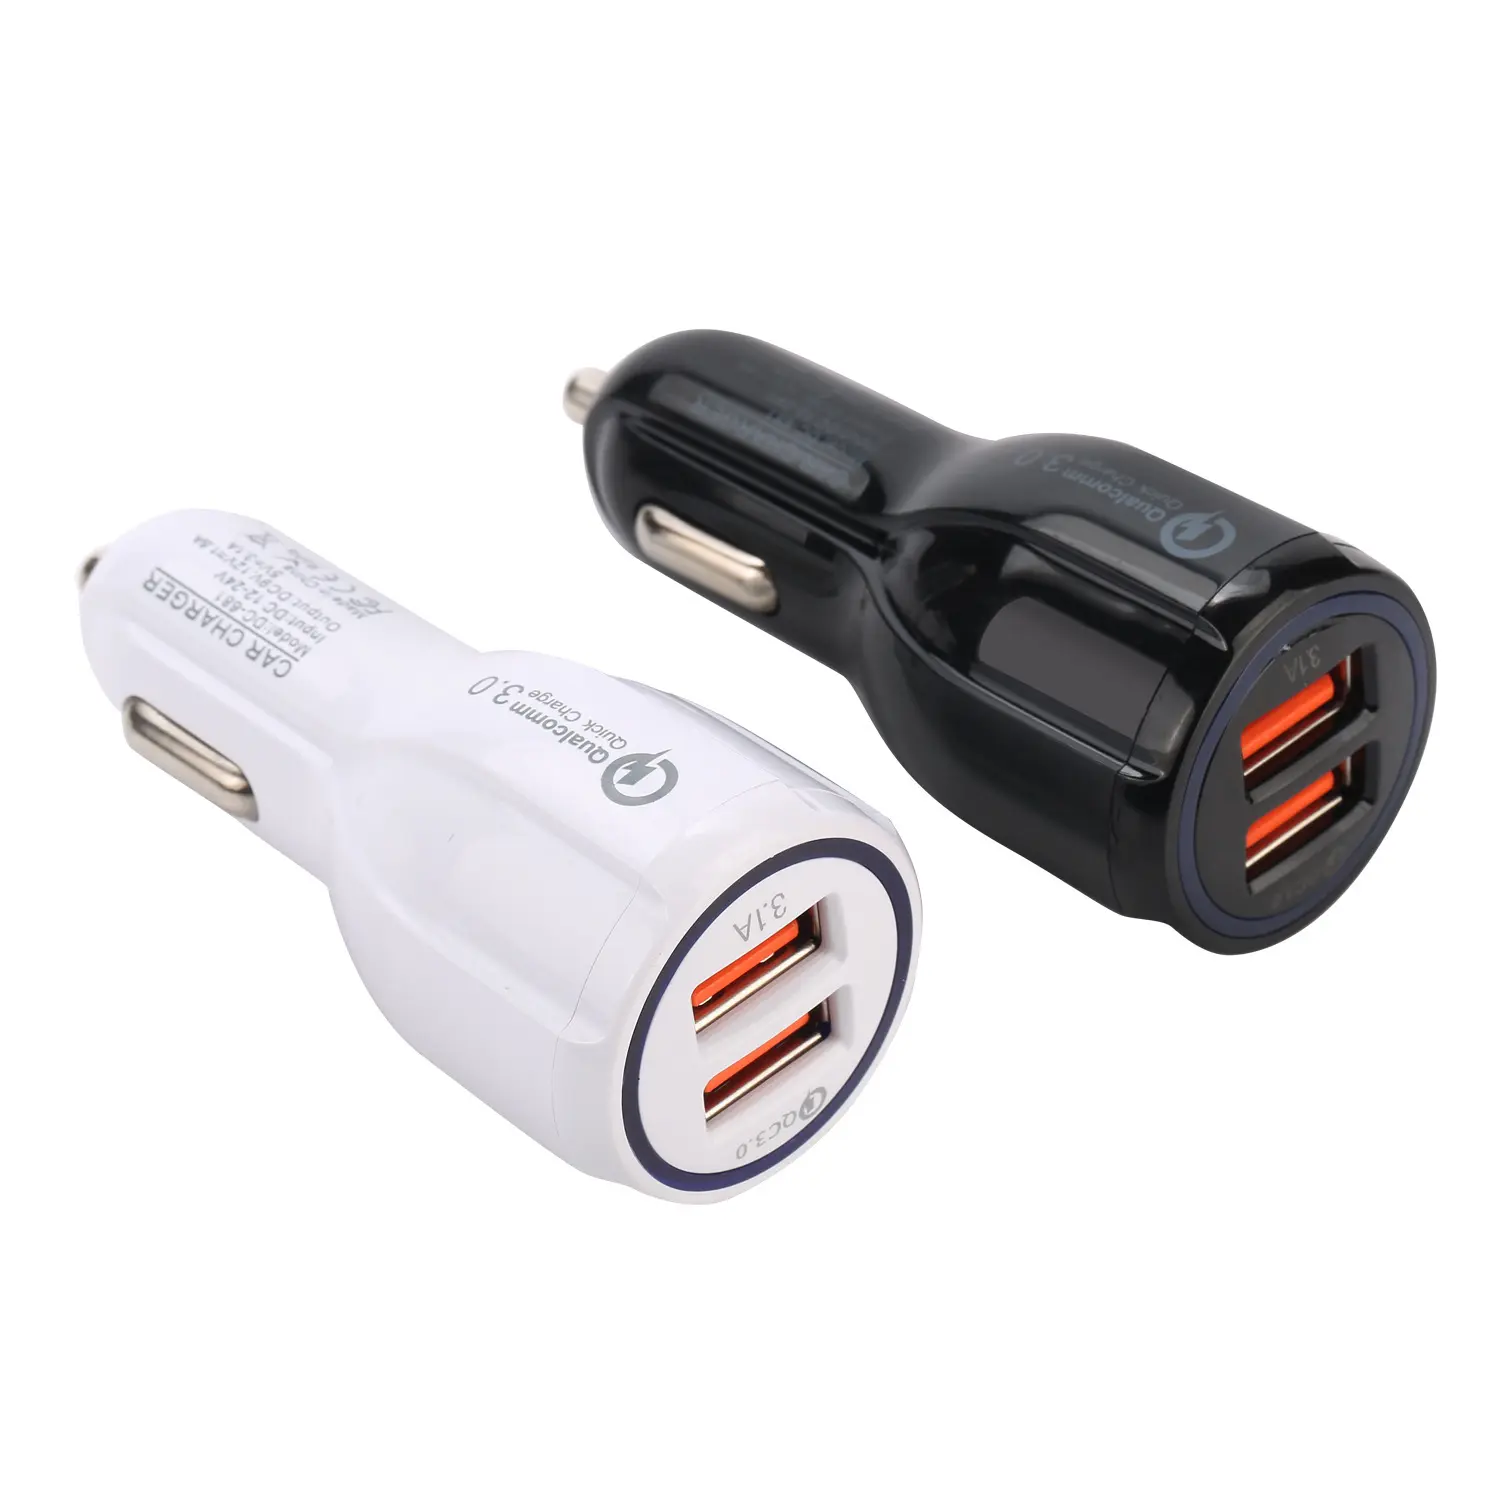 QC 3.0 fast charging 3.1A Dual USB Car Charger Universal Travel Car Charger